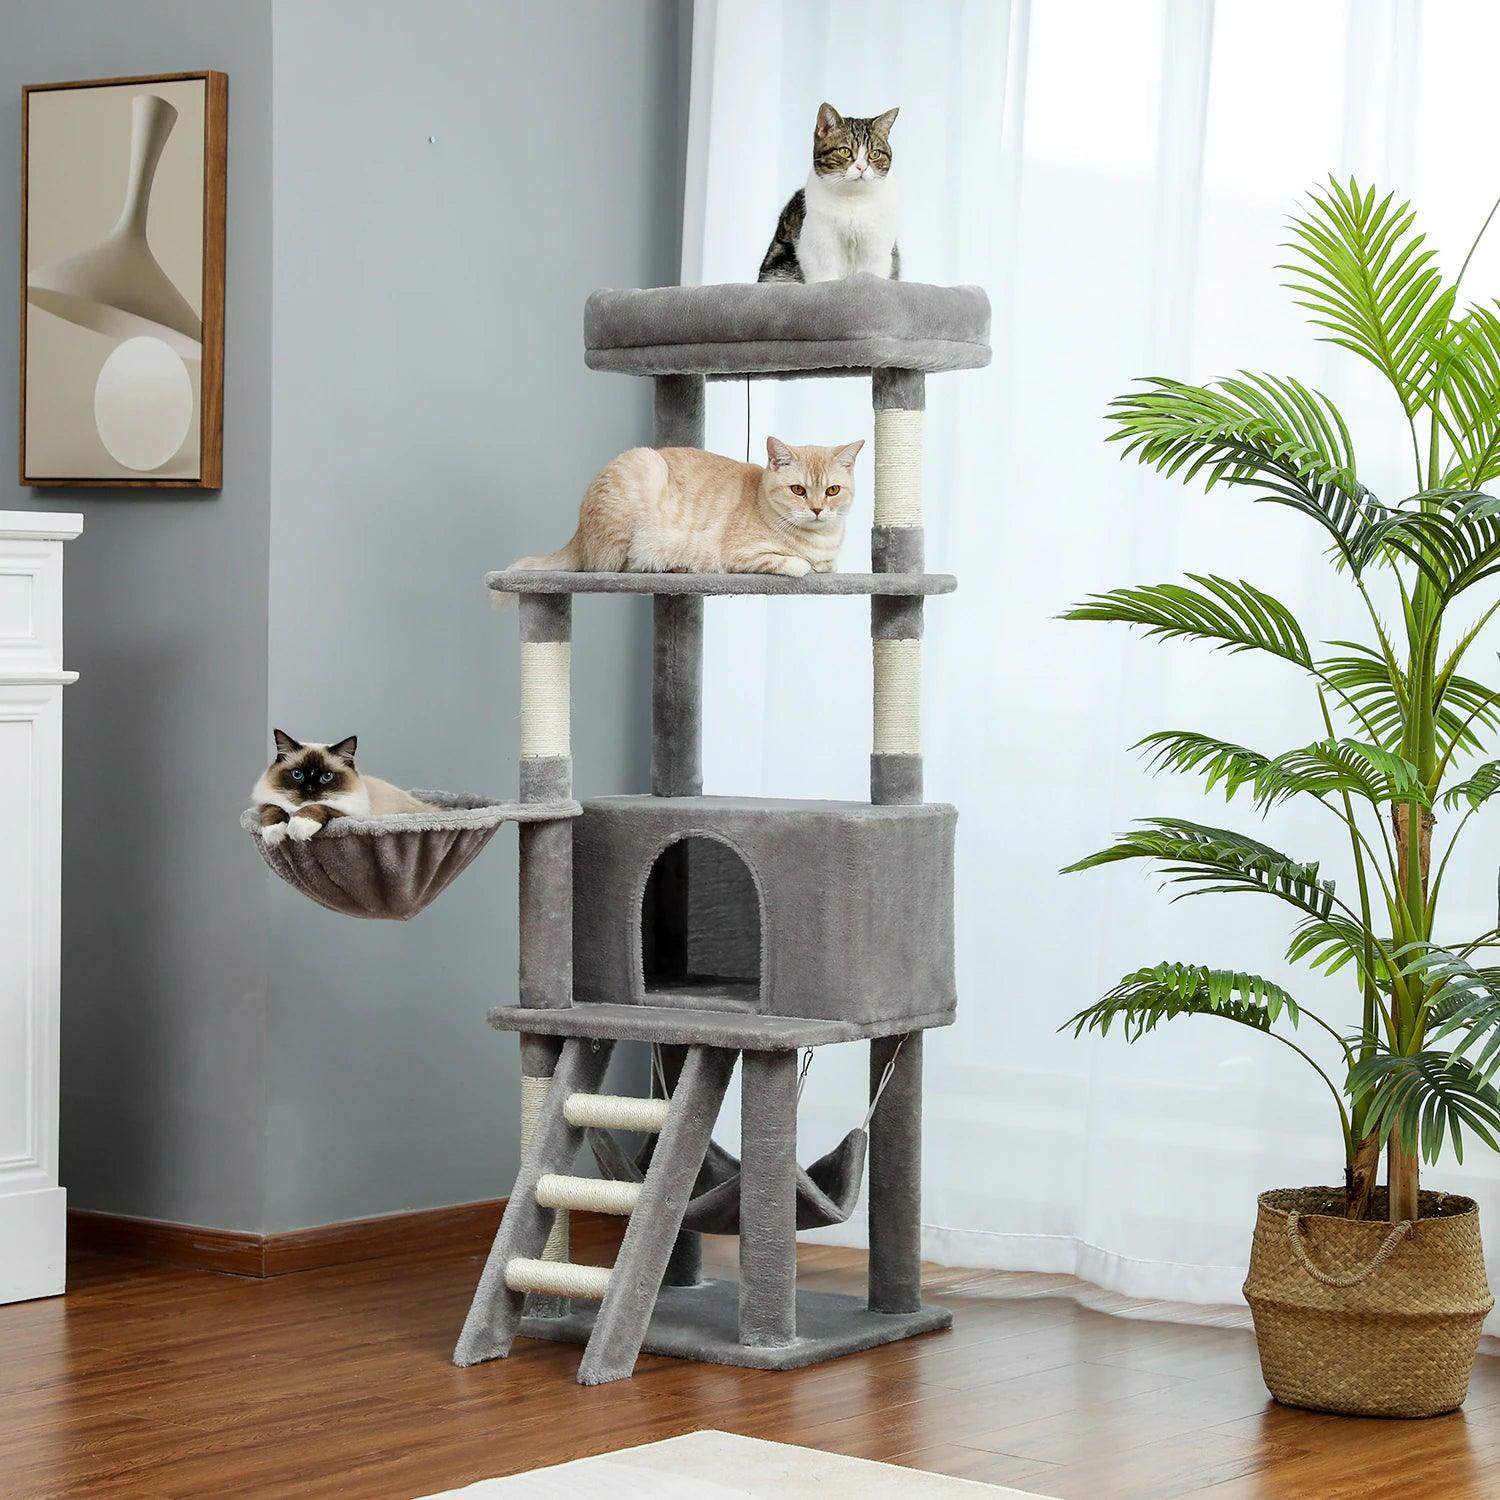 Paws and Perch Cat Treehouse - KittyNook Cat Company